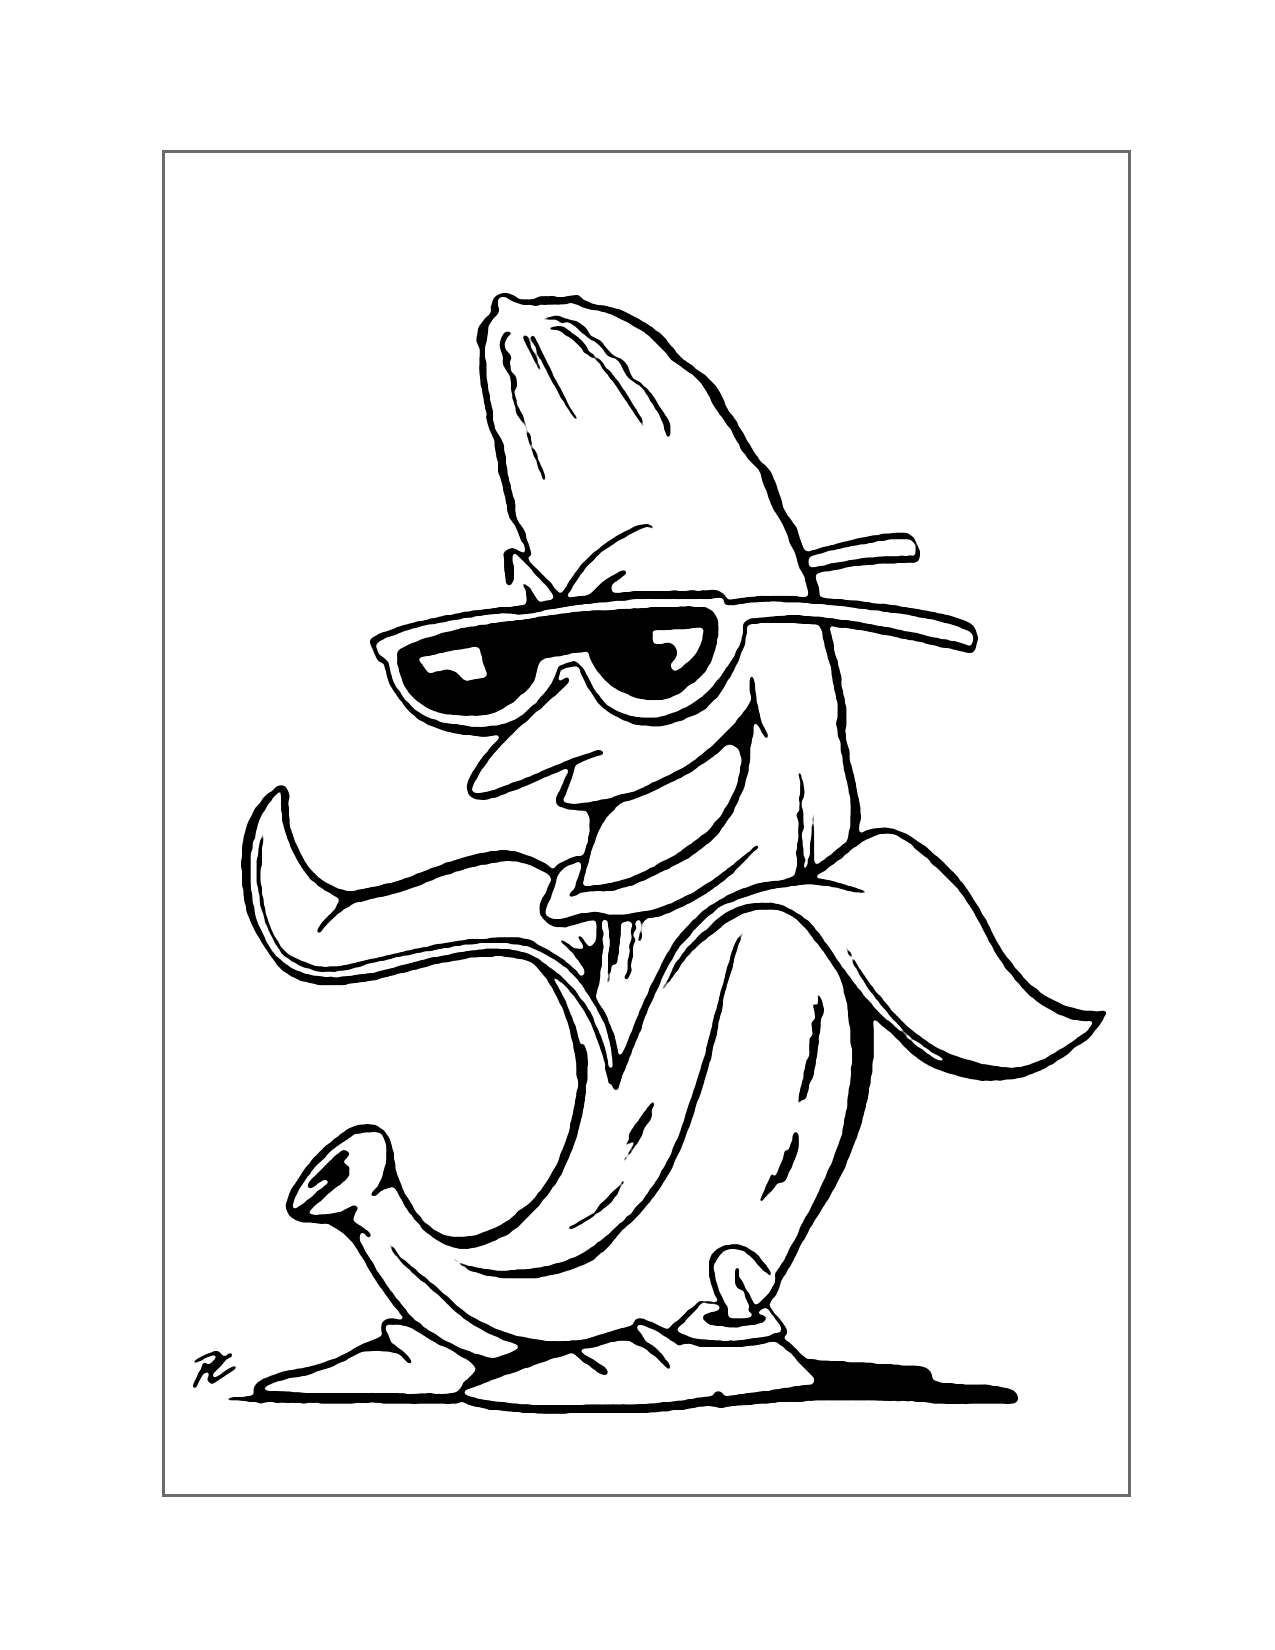 Funny Banana With Sunglasses Coloring Page